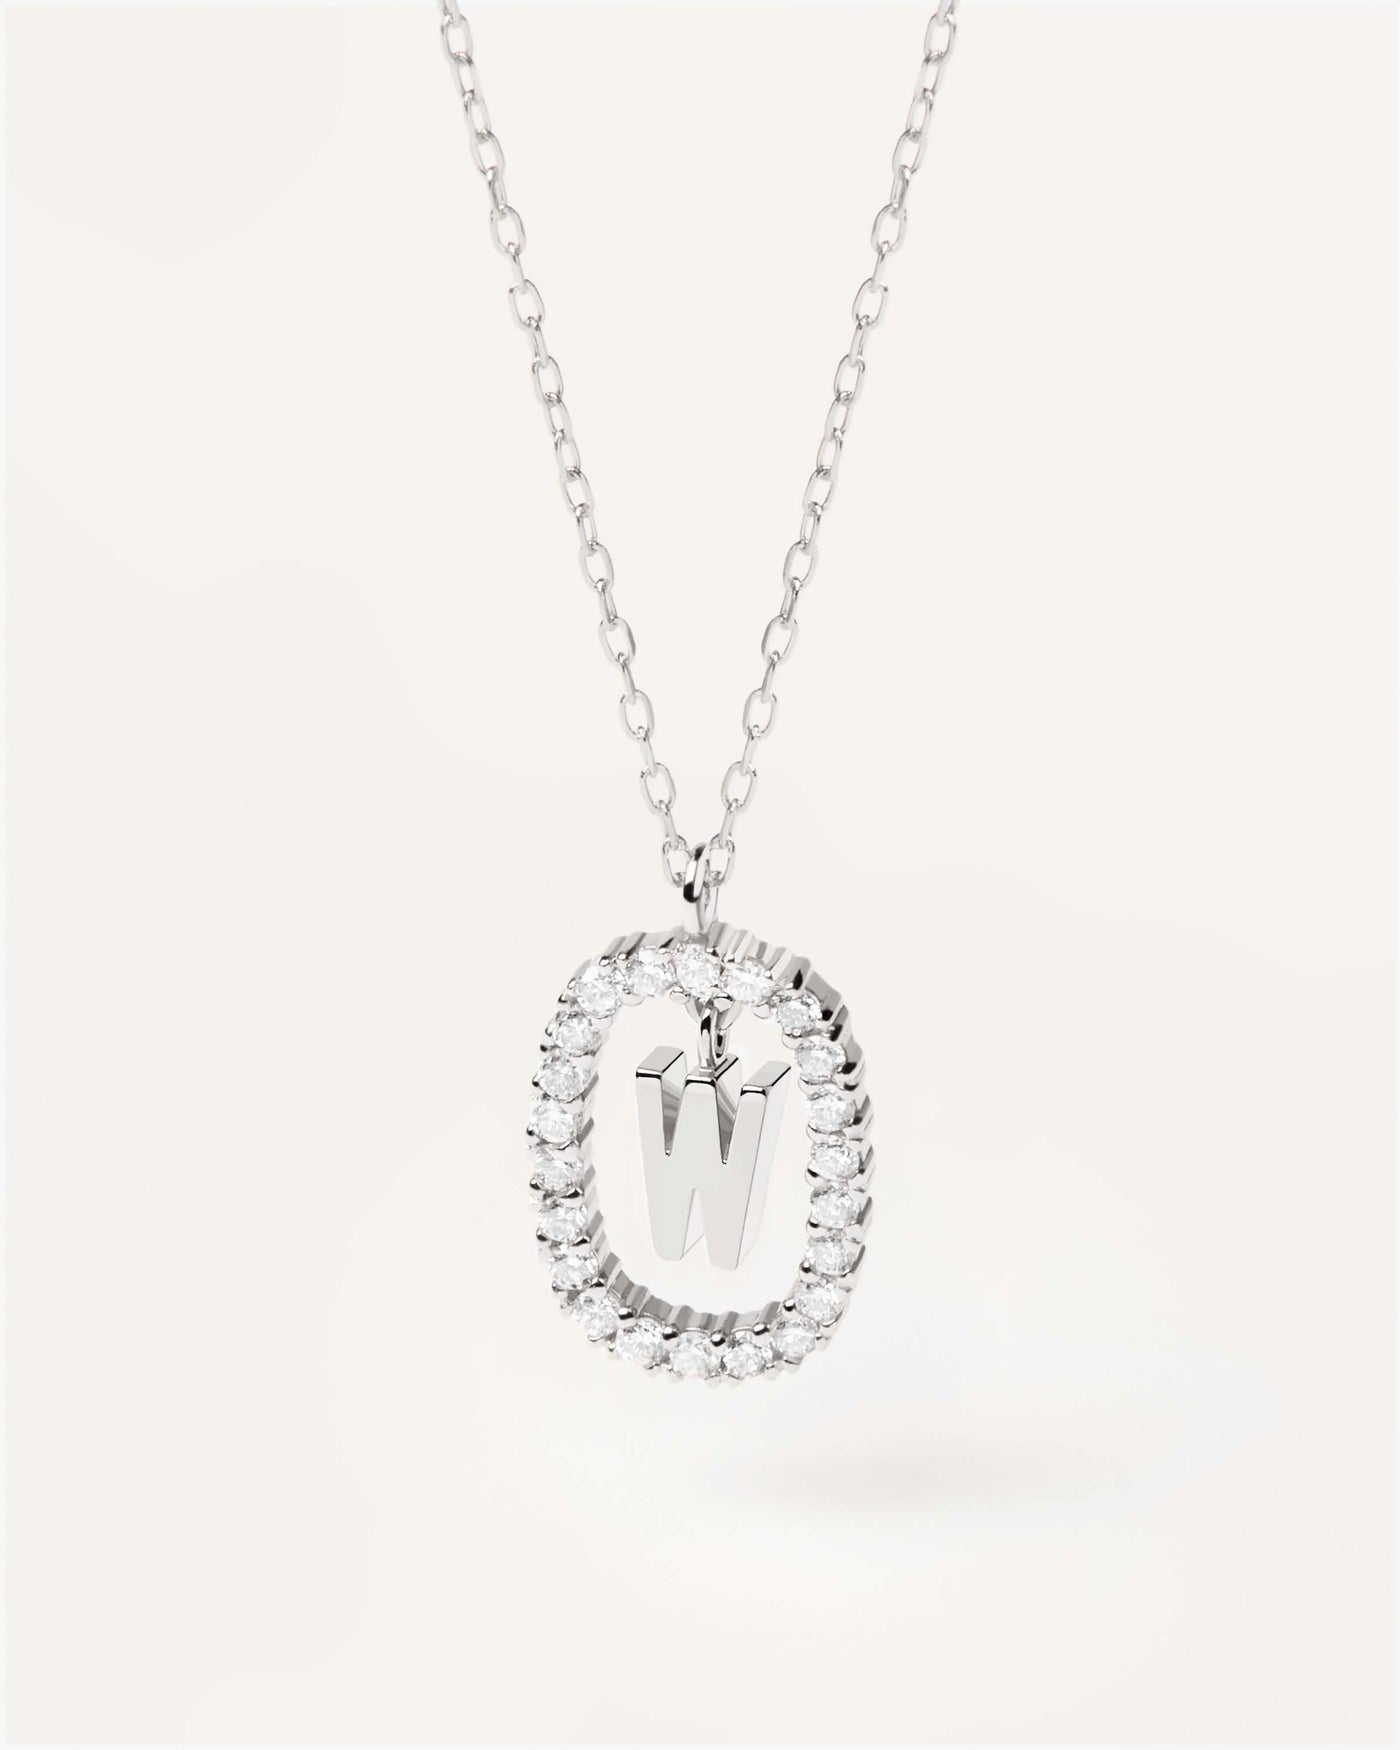 2023 Selection | Diamonds and White Gold Letter W Necklace. Initial W necklace in solid white gold, circled by 0.33 carats lab-grown diamonds. Get the latest arrival from PDPAOLA. Place your order safely and get this Best Seller. Free Shipping.